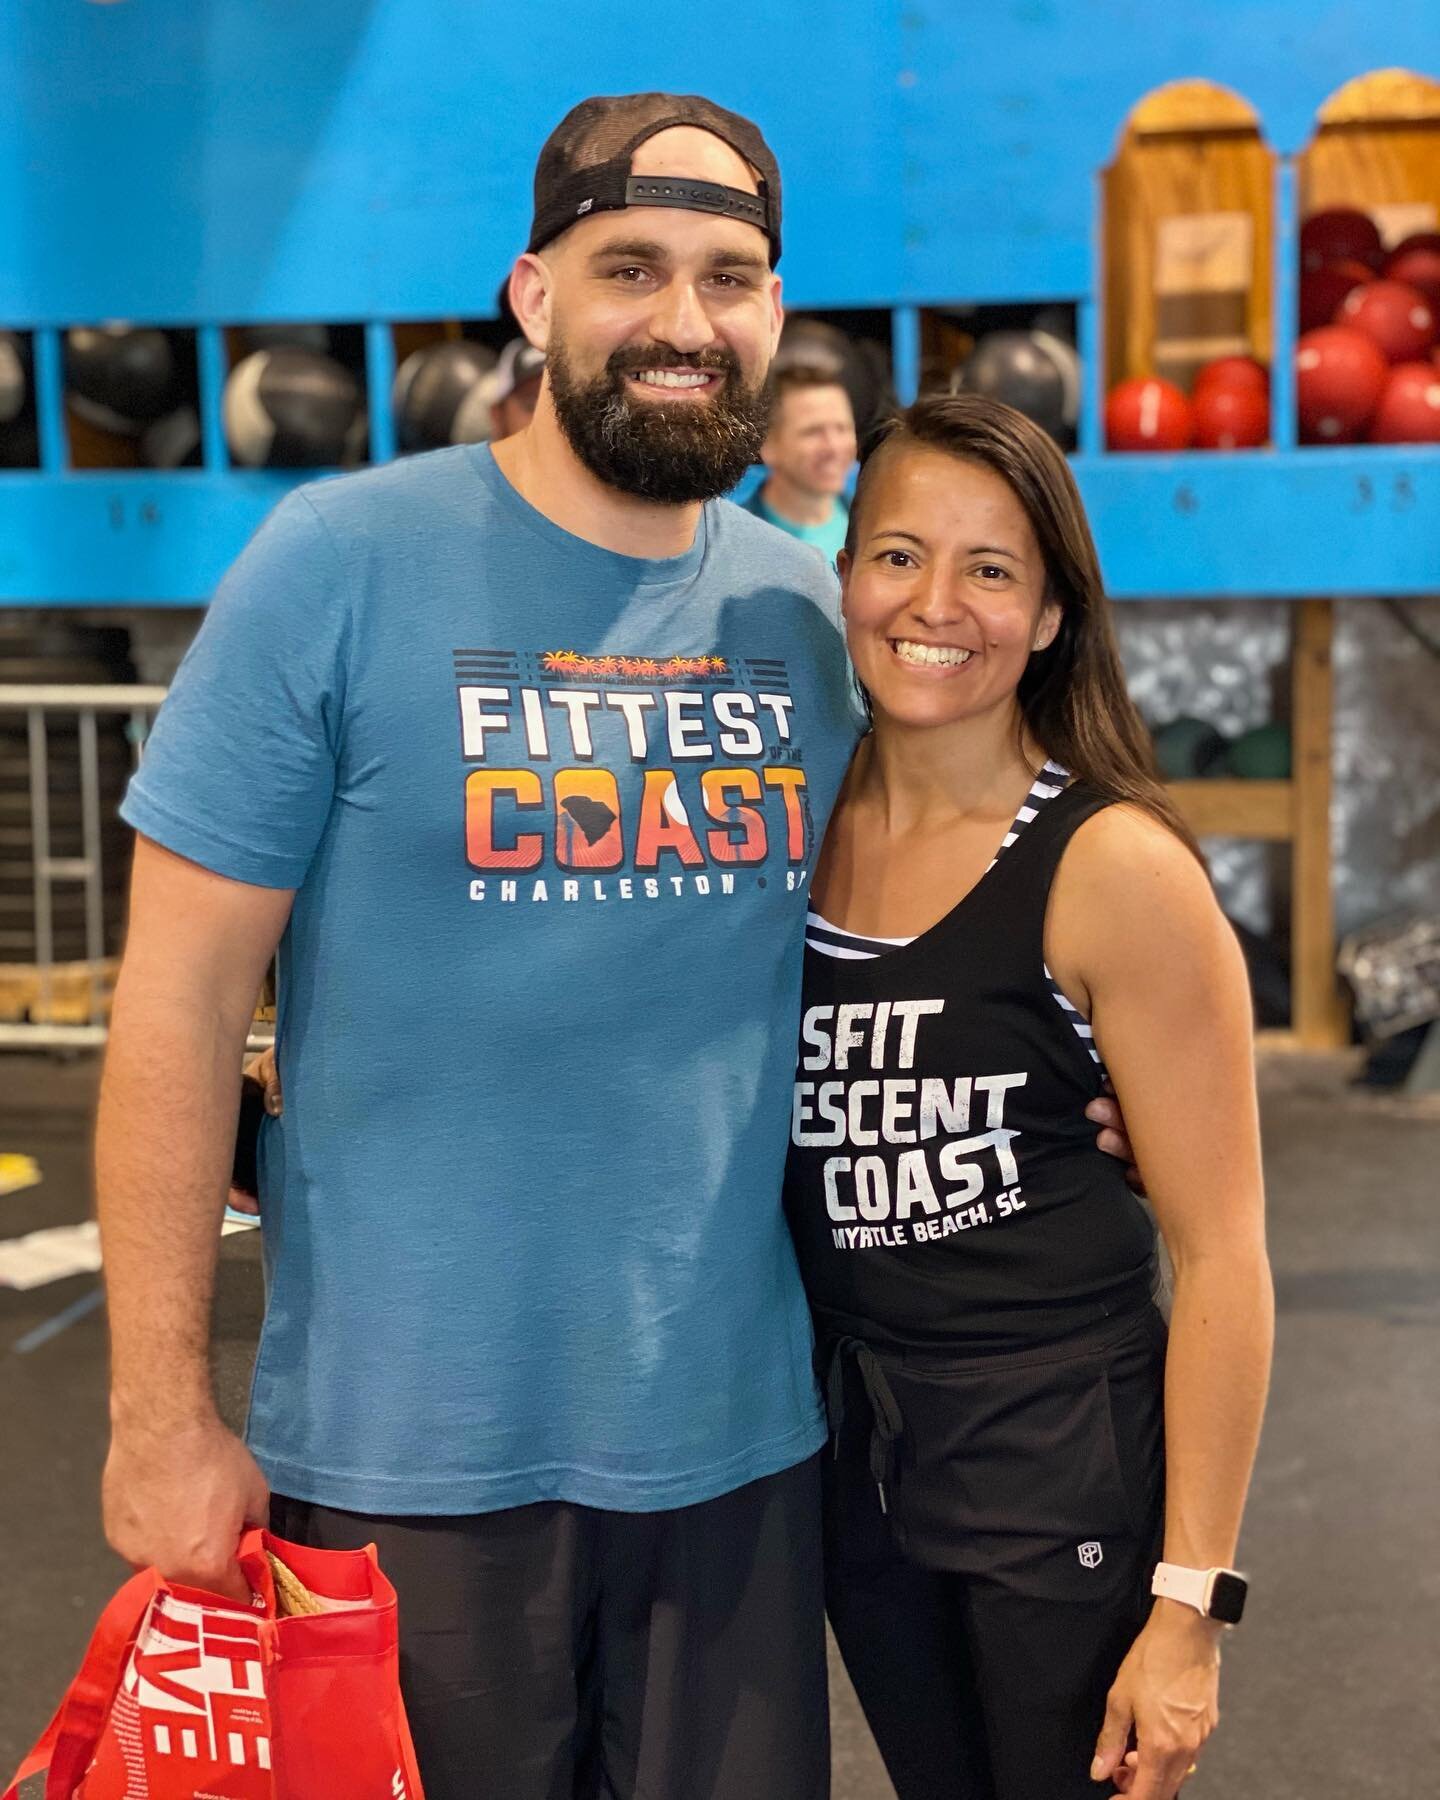 Meet the new owners of CrossFit Crescent Coast, Jon and Gabi Leggett! @xleggett @gabi_leggett 

Jon grew up in Ocean Isle Beach, NC. 
Gabi was born in La Paz, Bolivia and grew up in Miami Beach, FL. 

They met in Ottawa, Ontario, Canada. It&rsquo;s a